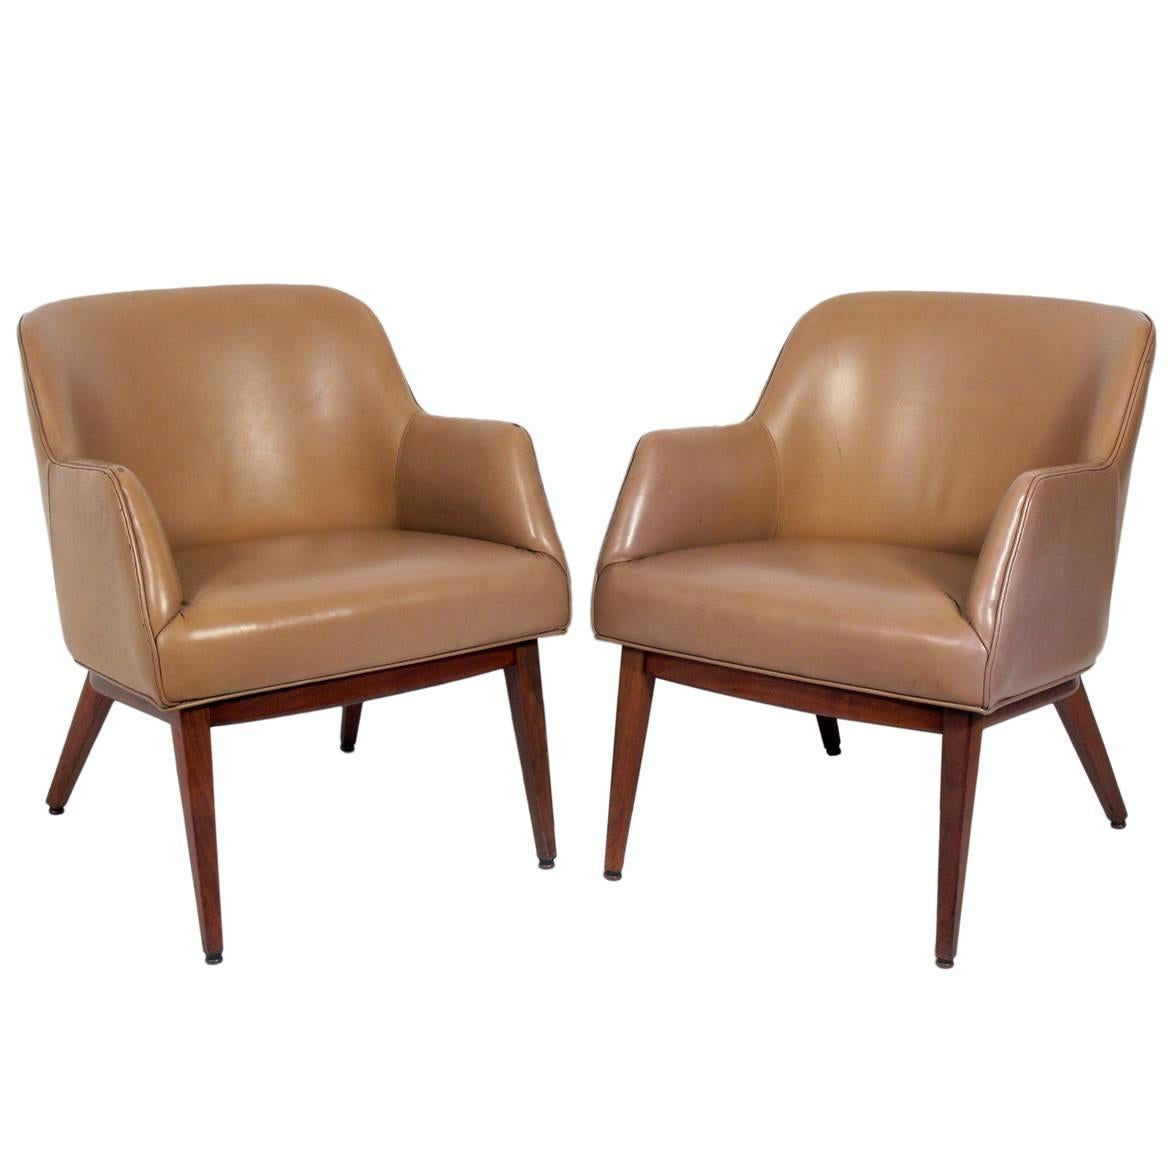 Pair of Leather Lounge Chairs Designed by Jens Risom